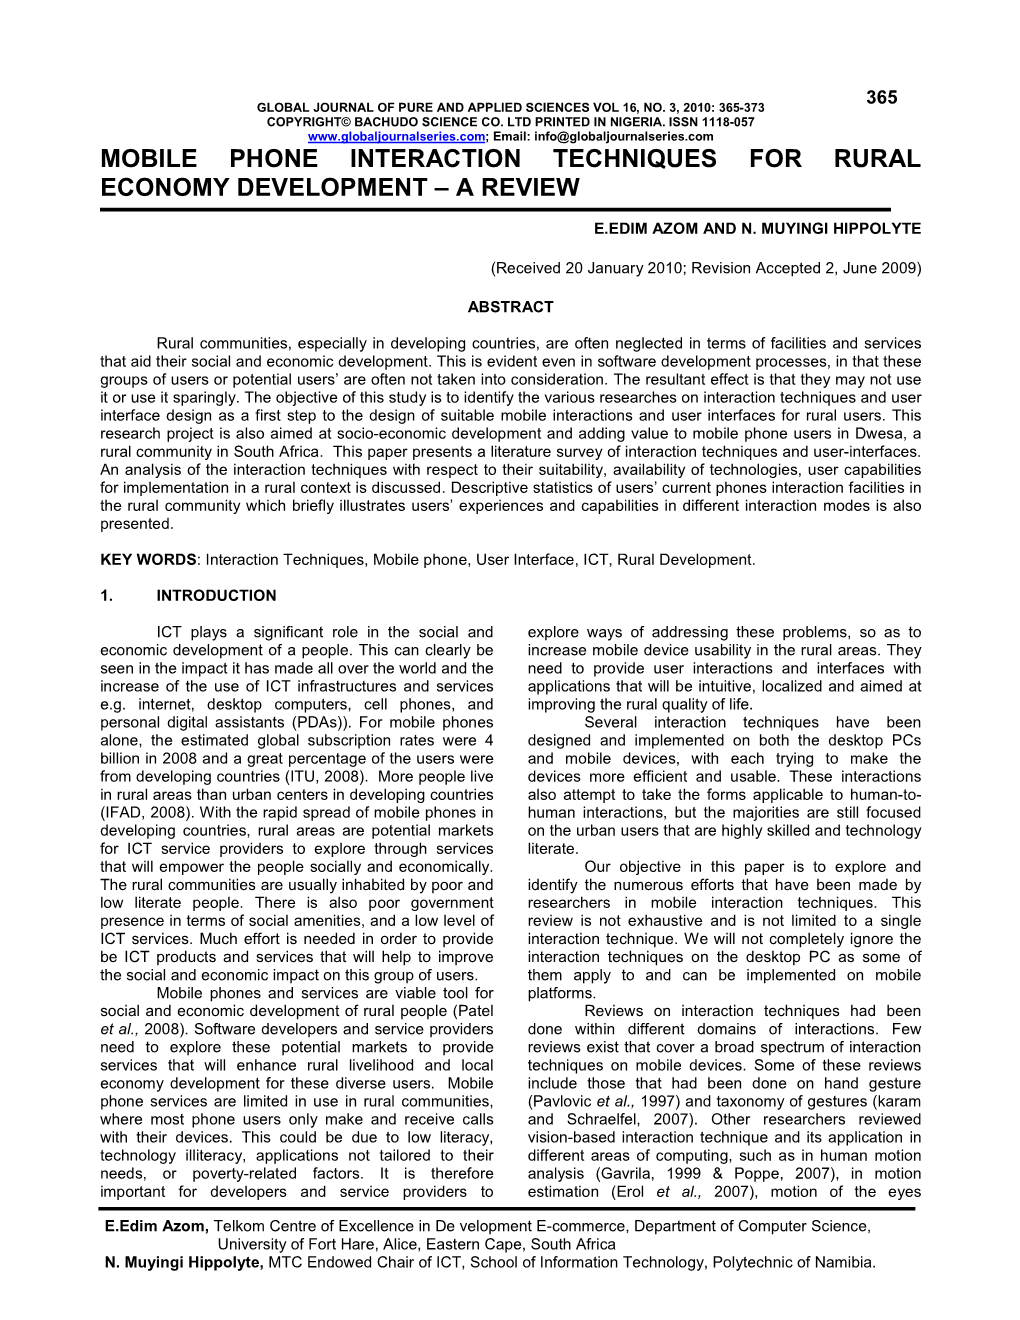 Mobile Phone Interaction Techniques for Rural Economy Development – a Review